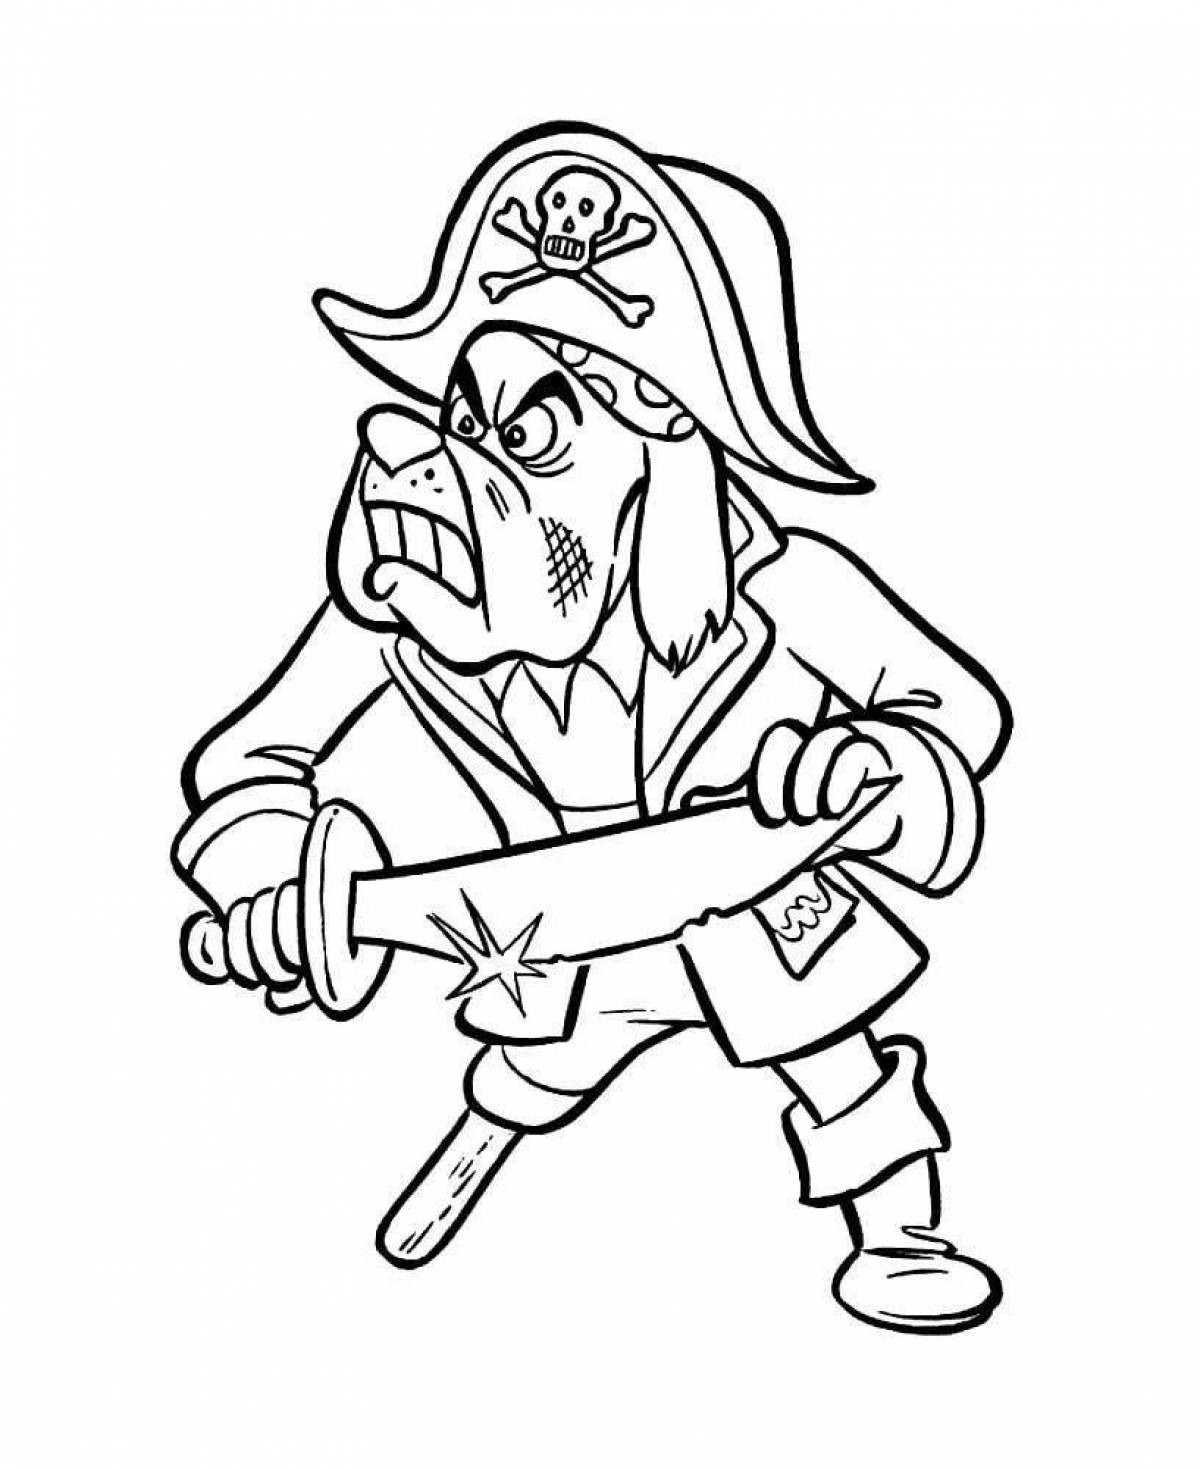 Amazing Pirate coloring page